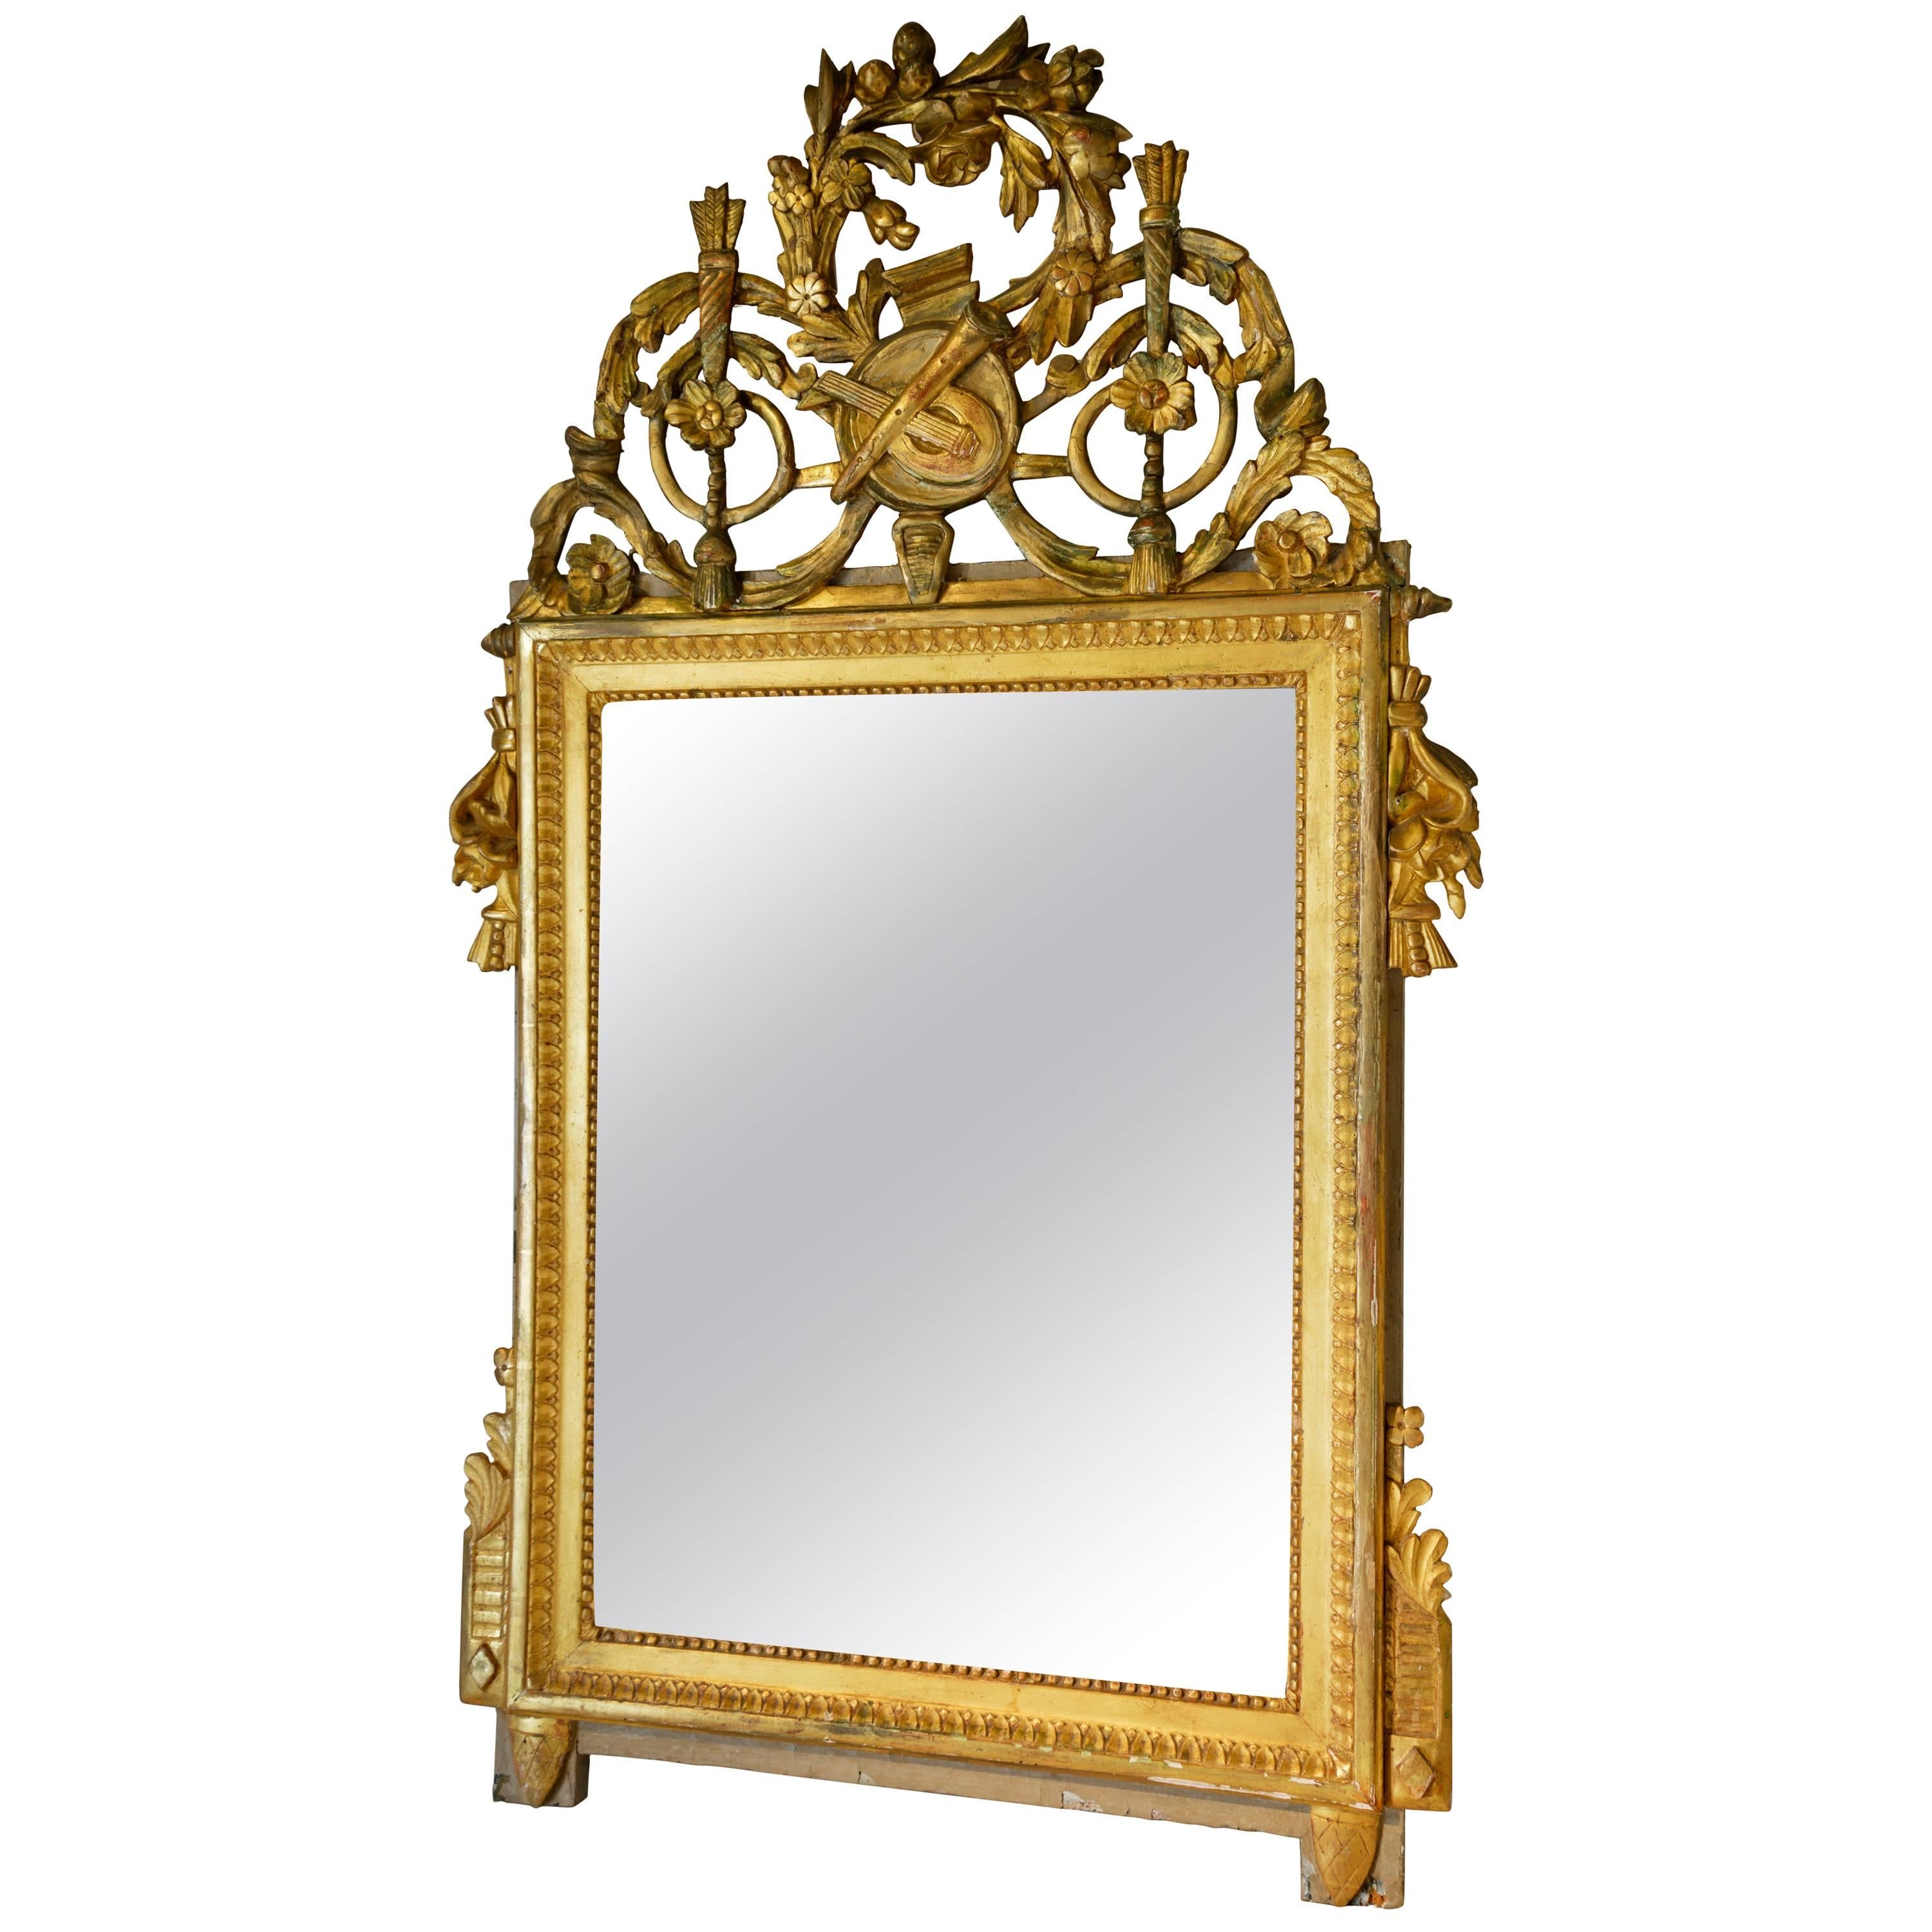 Louis XVI Late 18th Century Giltwood Carved Wall Mirror